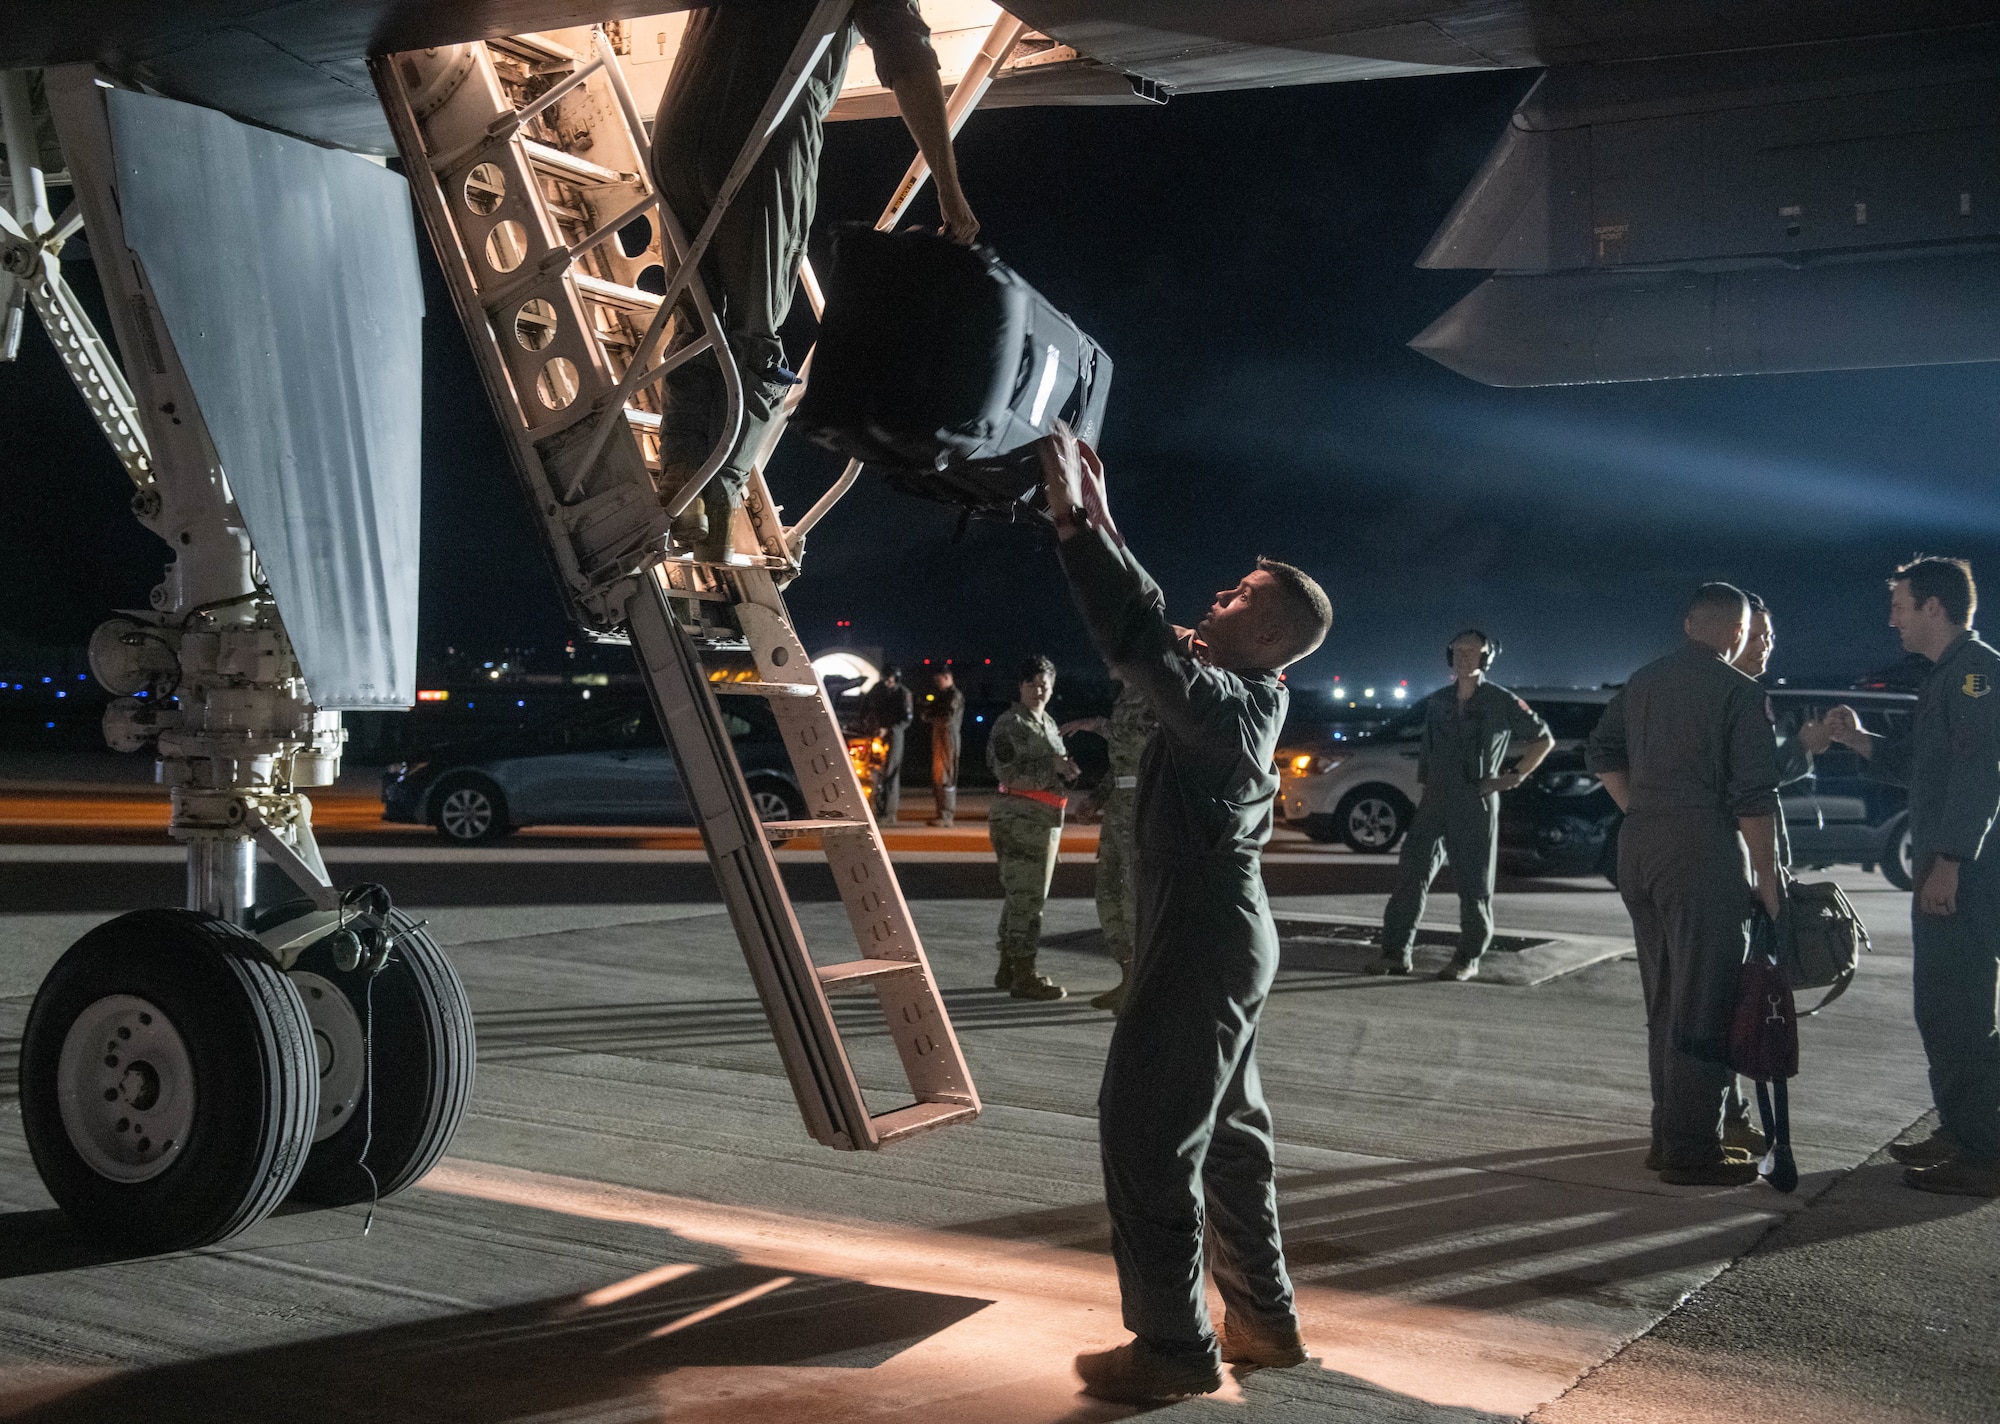 U.S. Air Force personnel assigned to the 34th Bomb Squadron, Ellsworth Air Force Base, unload bags from a B-1B Lancer on Andersen Air Force Base, Guam, after arriving for a Bomber Task Force mission June 3, 2022.